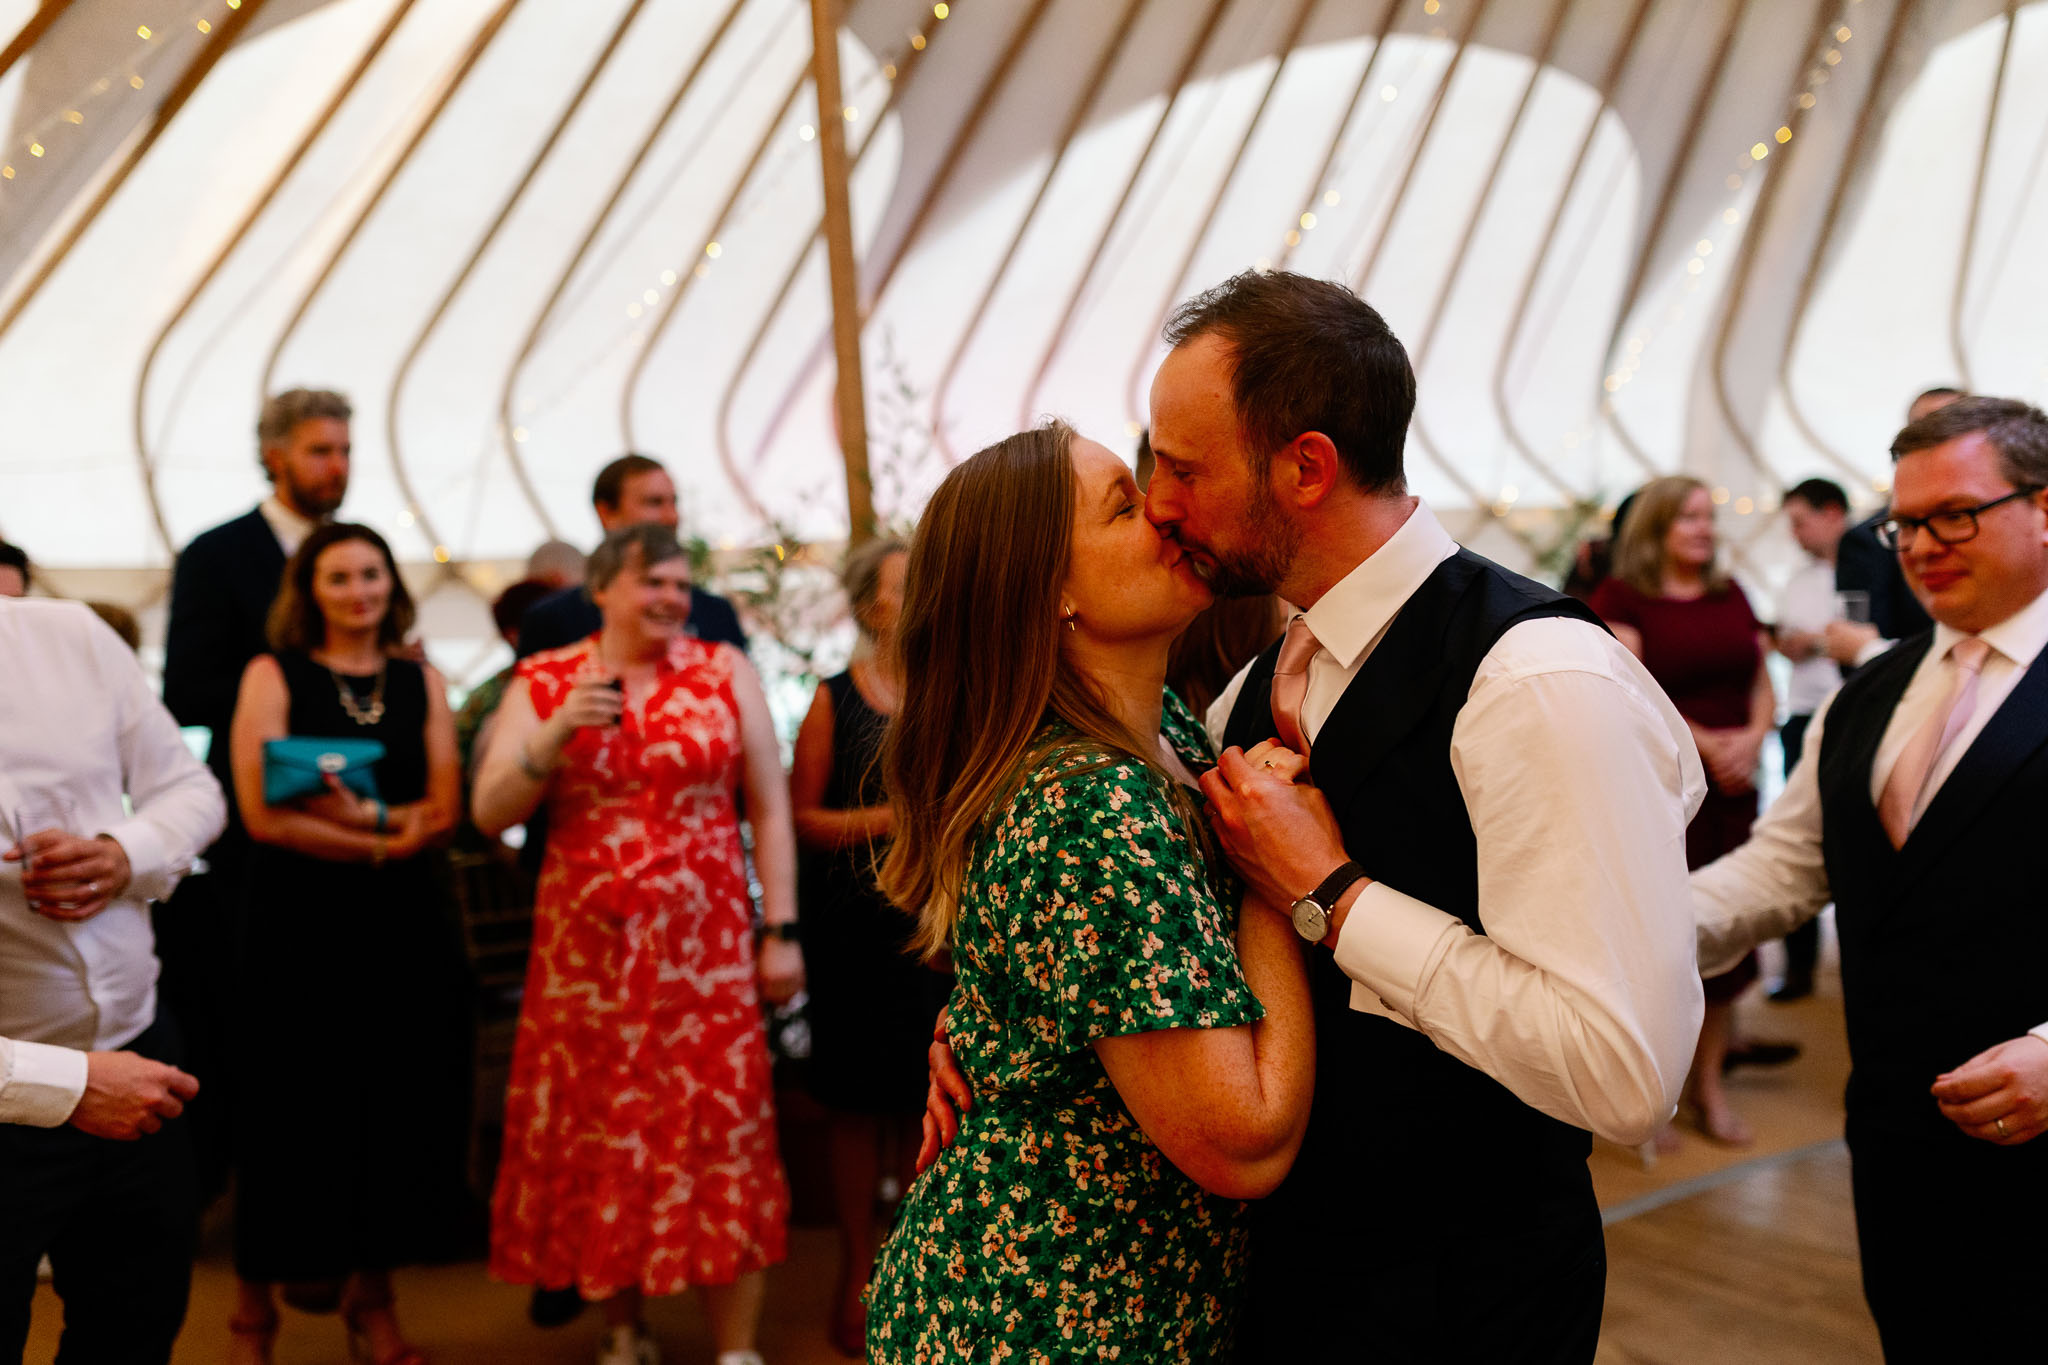 Dancing at a wedding in a Yurt 